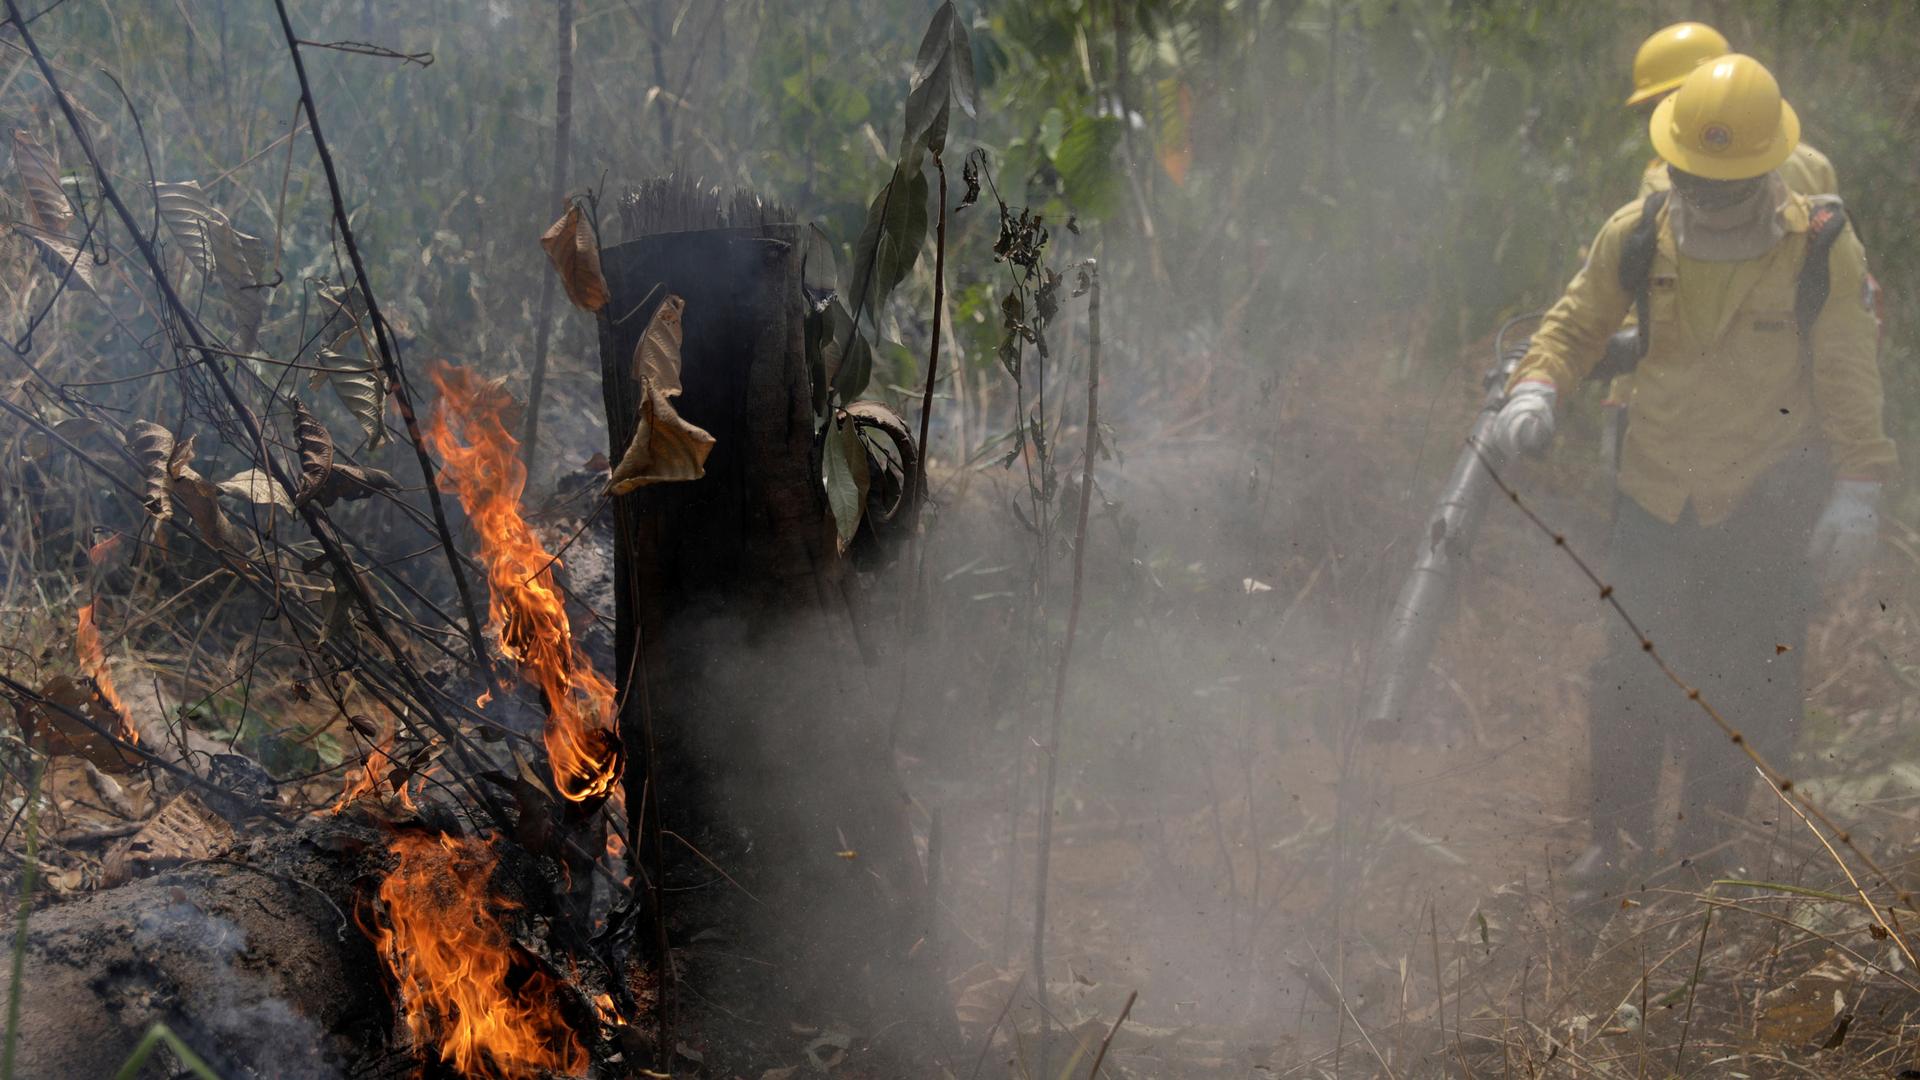 Firefighters extinguish a fire in Amazon jungle in Porto Velho, Brazil, on August 25, 2019.